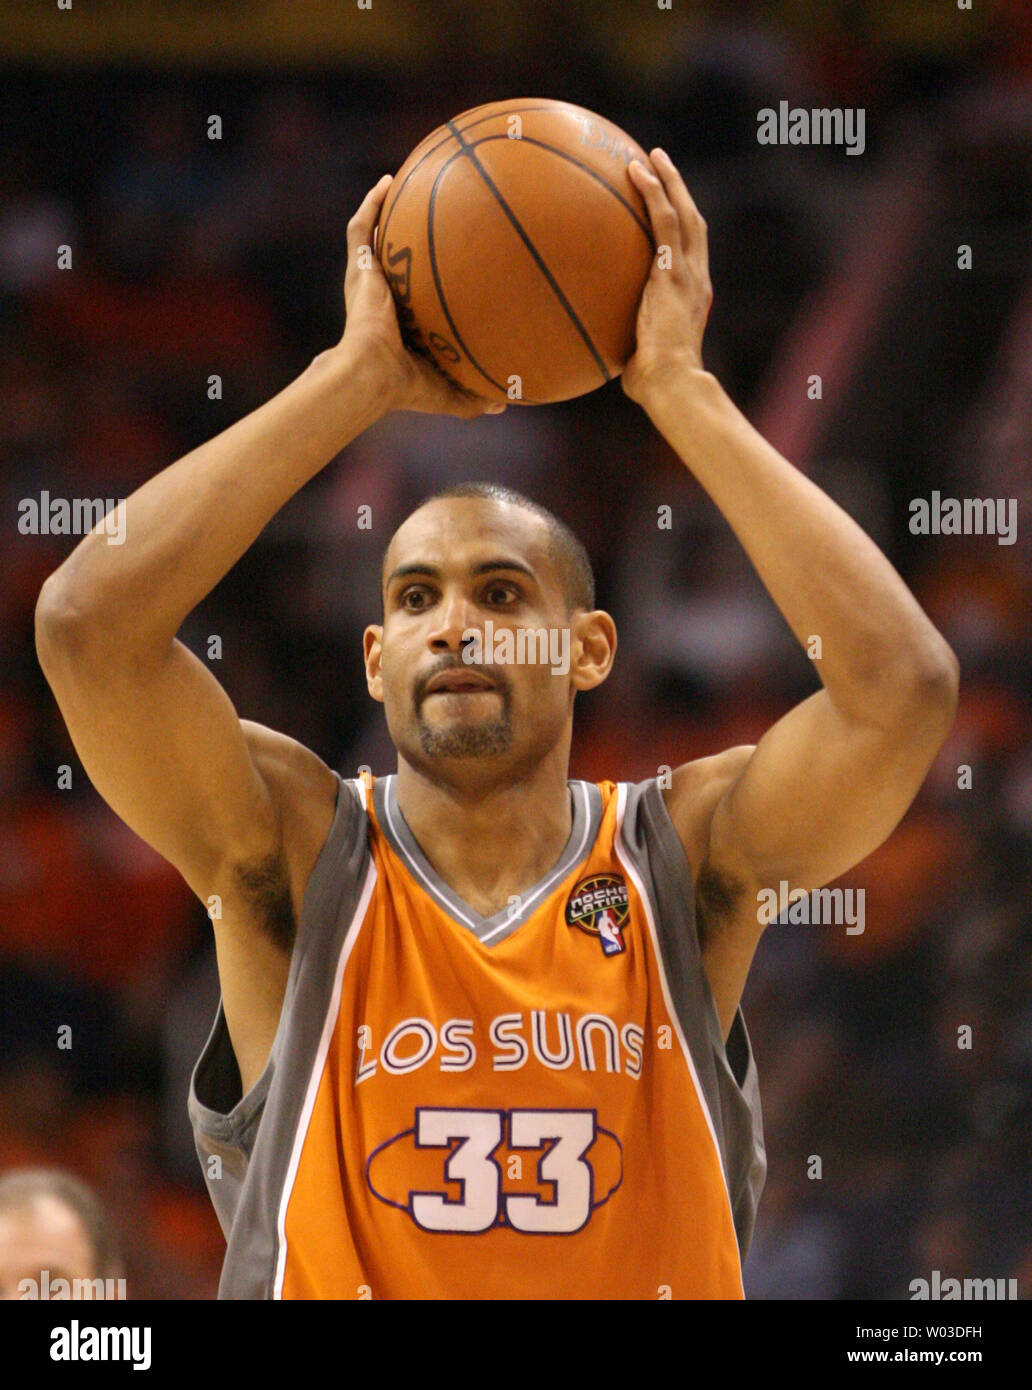 Phoenix Suns Grant Hill wears the Los Suns jersey which is indicative of the immigration controversy in Arizona during the first  quarter of  Game 2 of the second round of the NBA Western Conference Playoffs at the US Airways Center, in Phoenix, AZ, May 5,2010.   UPI/Art Foxall Stock Photo